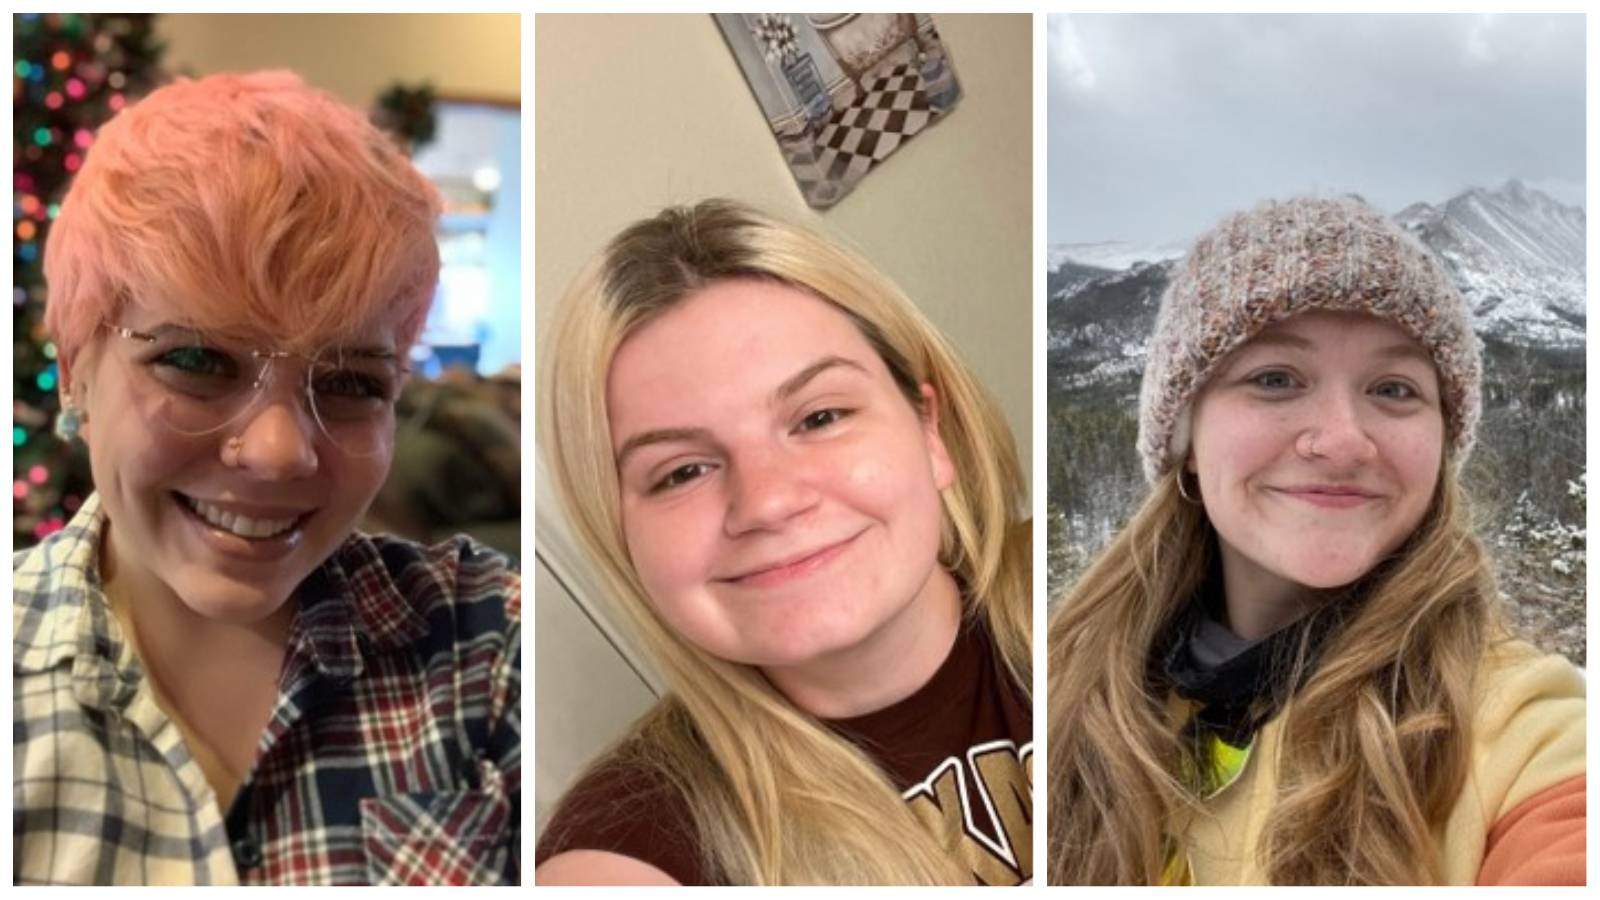 Collage of three women: one with pink hair and glasses, christmas tree in background, one with blonde hair, wall in background, one with blonde hair and a beanie, snow-capped mountains in background